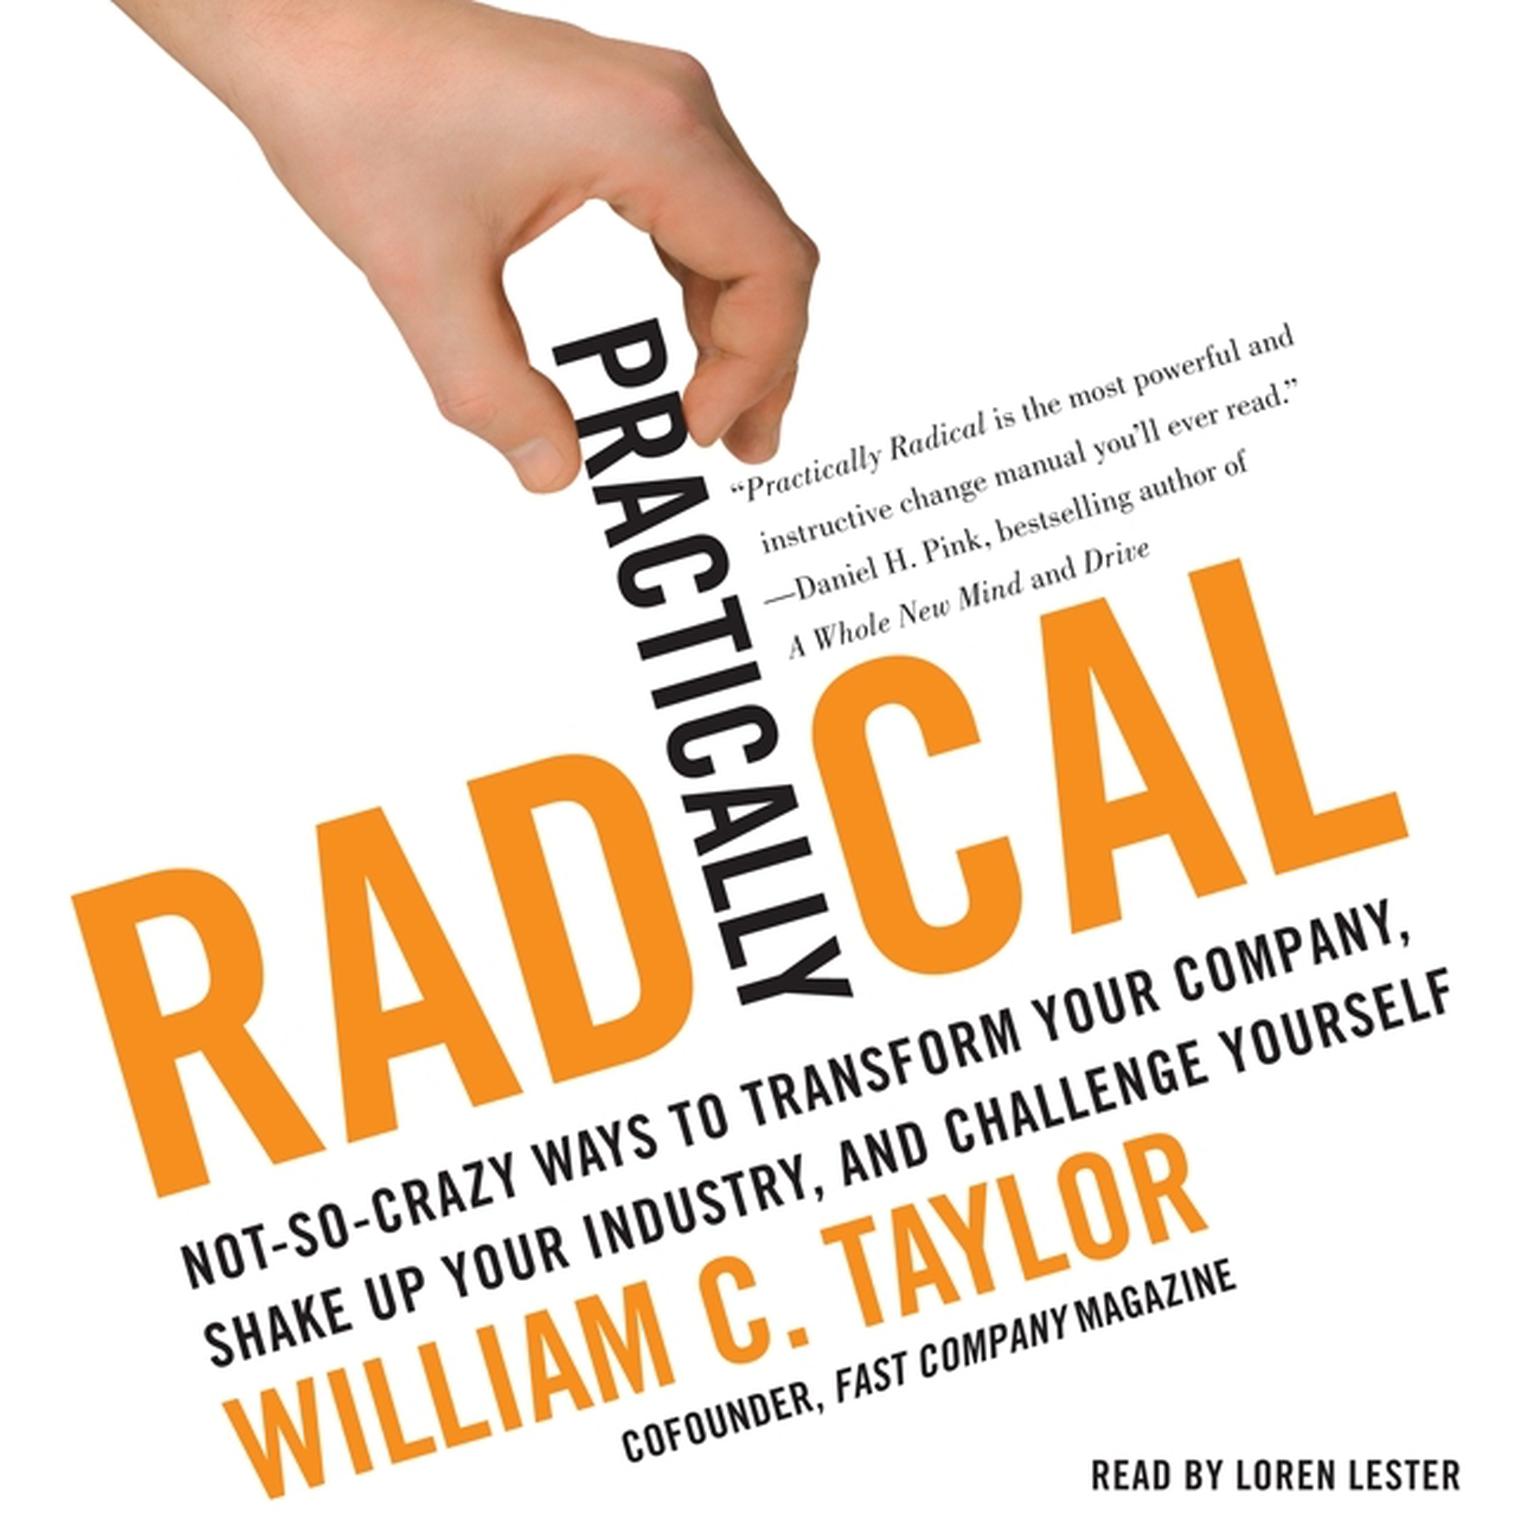 Practically Radical: Not-So-Crazy Ways to Transform Your Company, Shake Up Your Industry, and Challenge Yourself Audiobook, by William C. Taylor